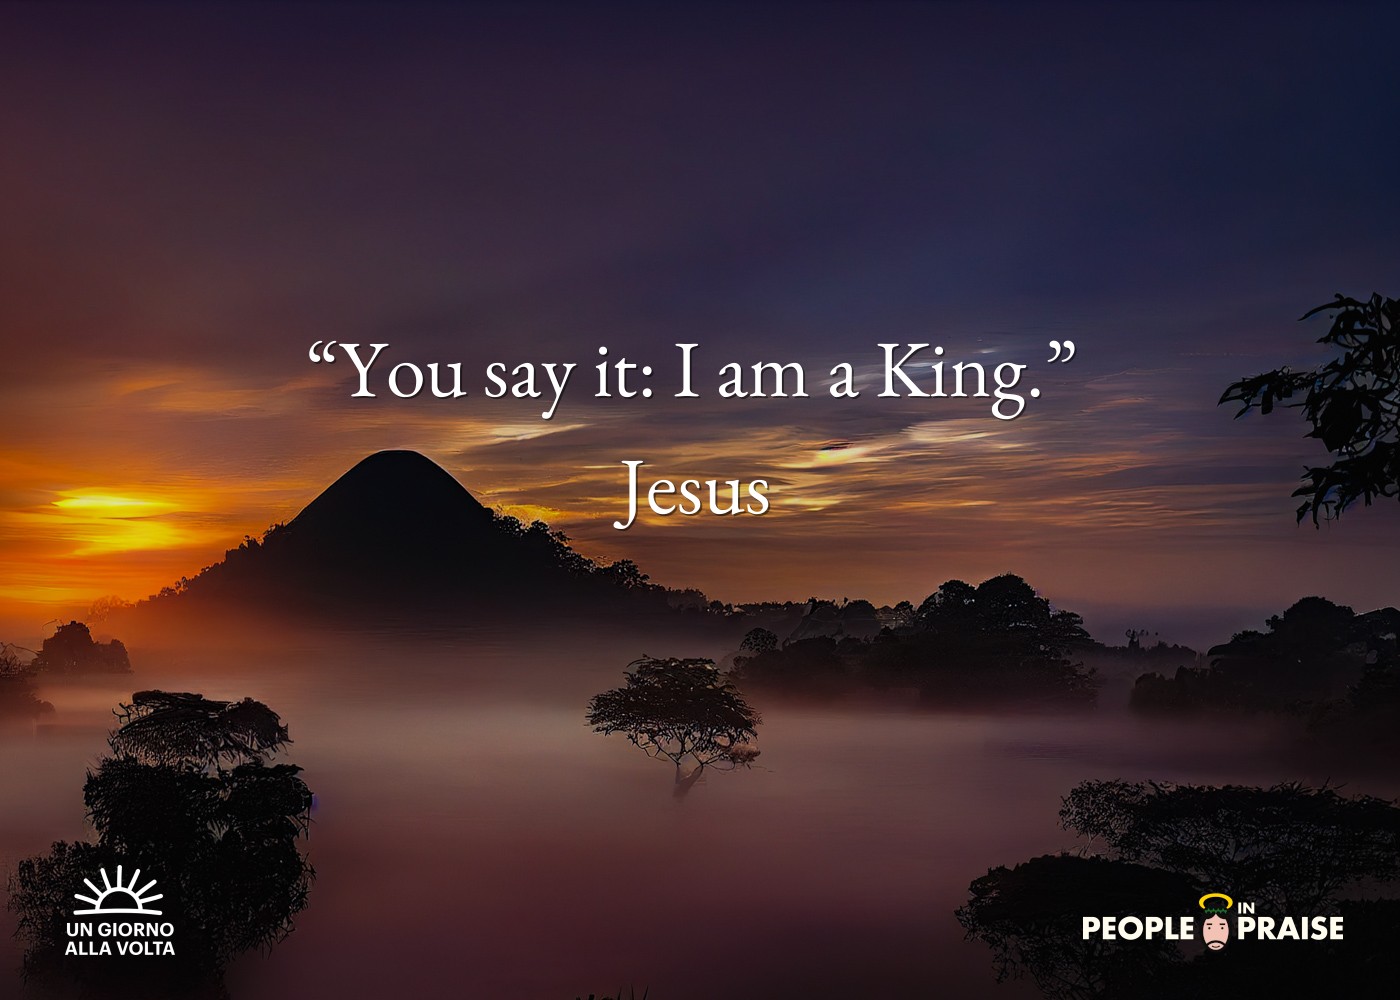 “You say it: I am a King.” 
Jesus
